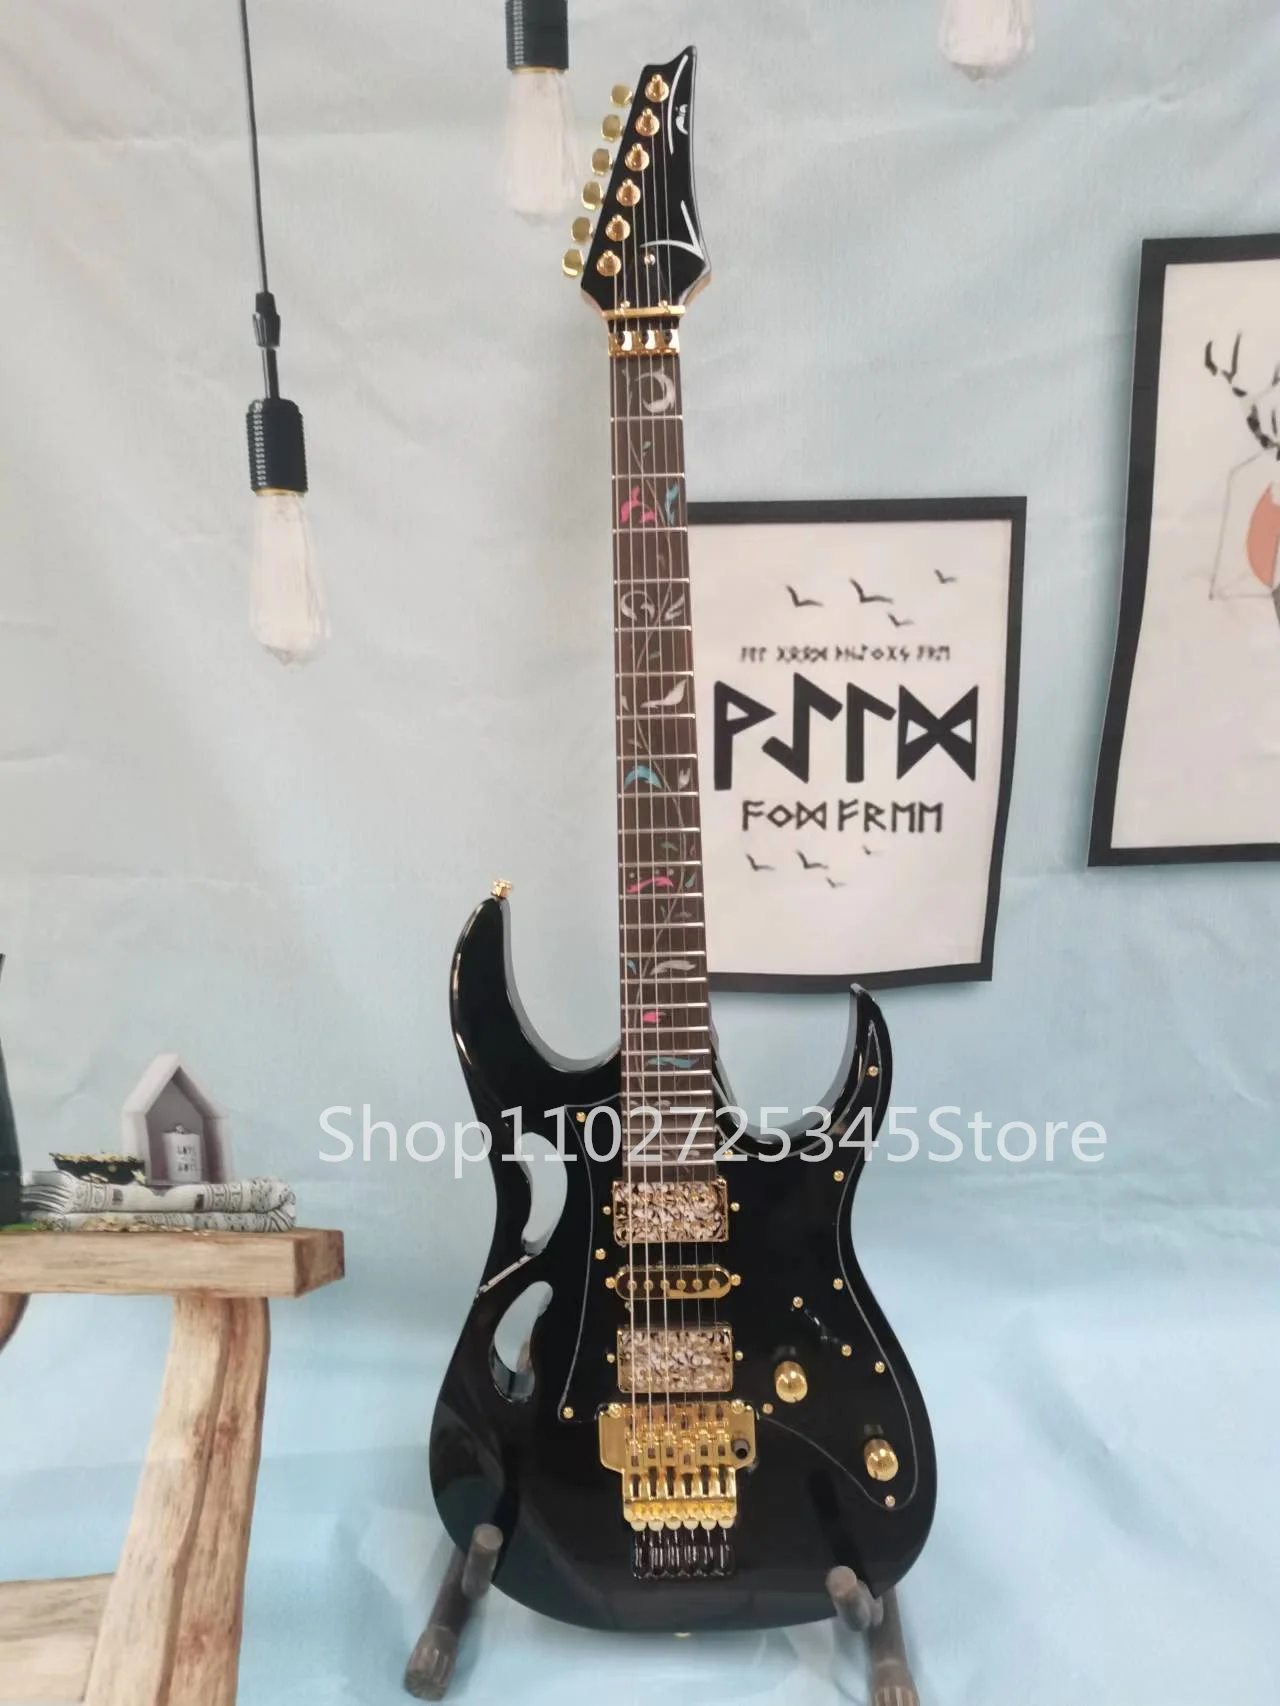 

6-string electric guitar, rosewood fingerboard, gold parts, customizable colors, including shipping costs